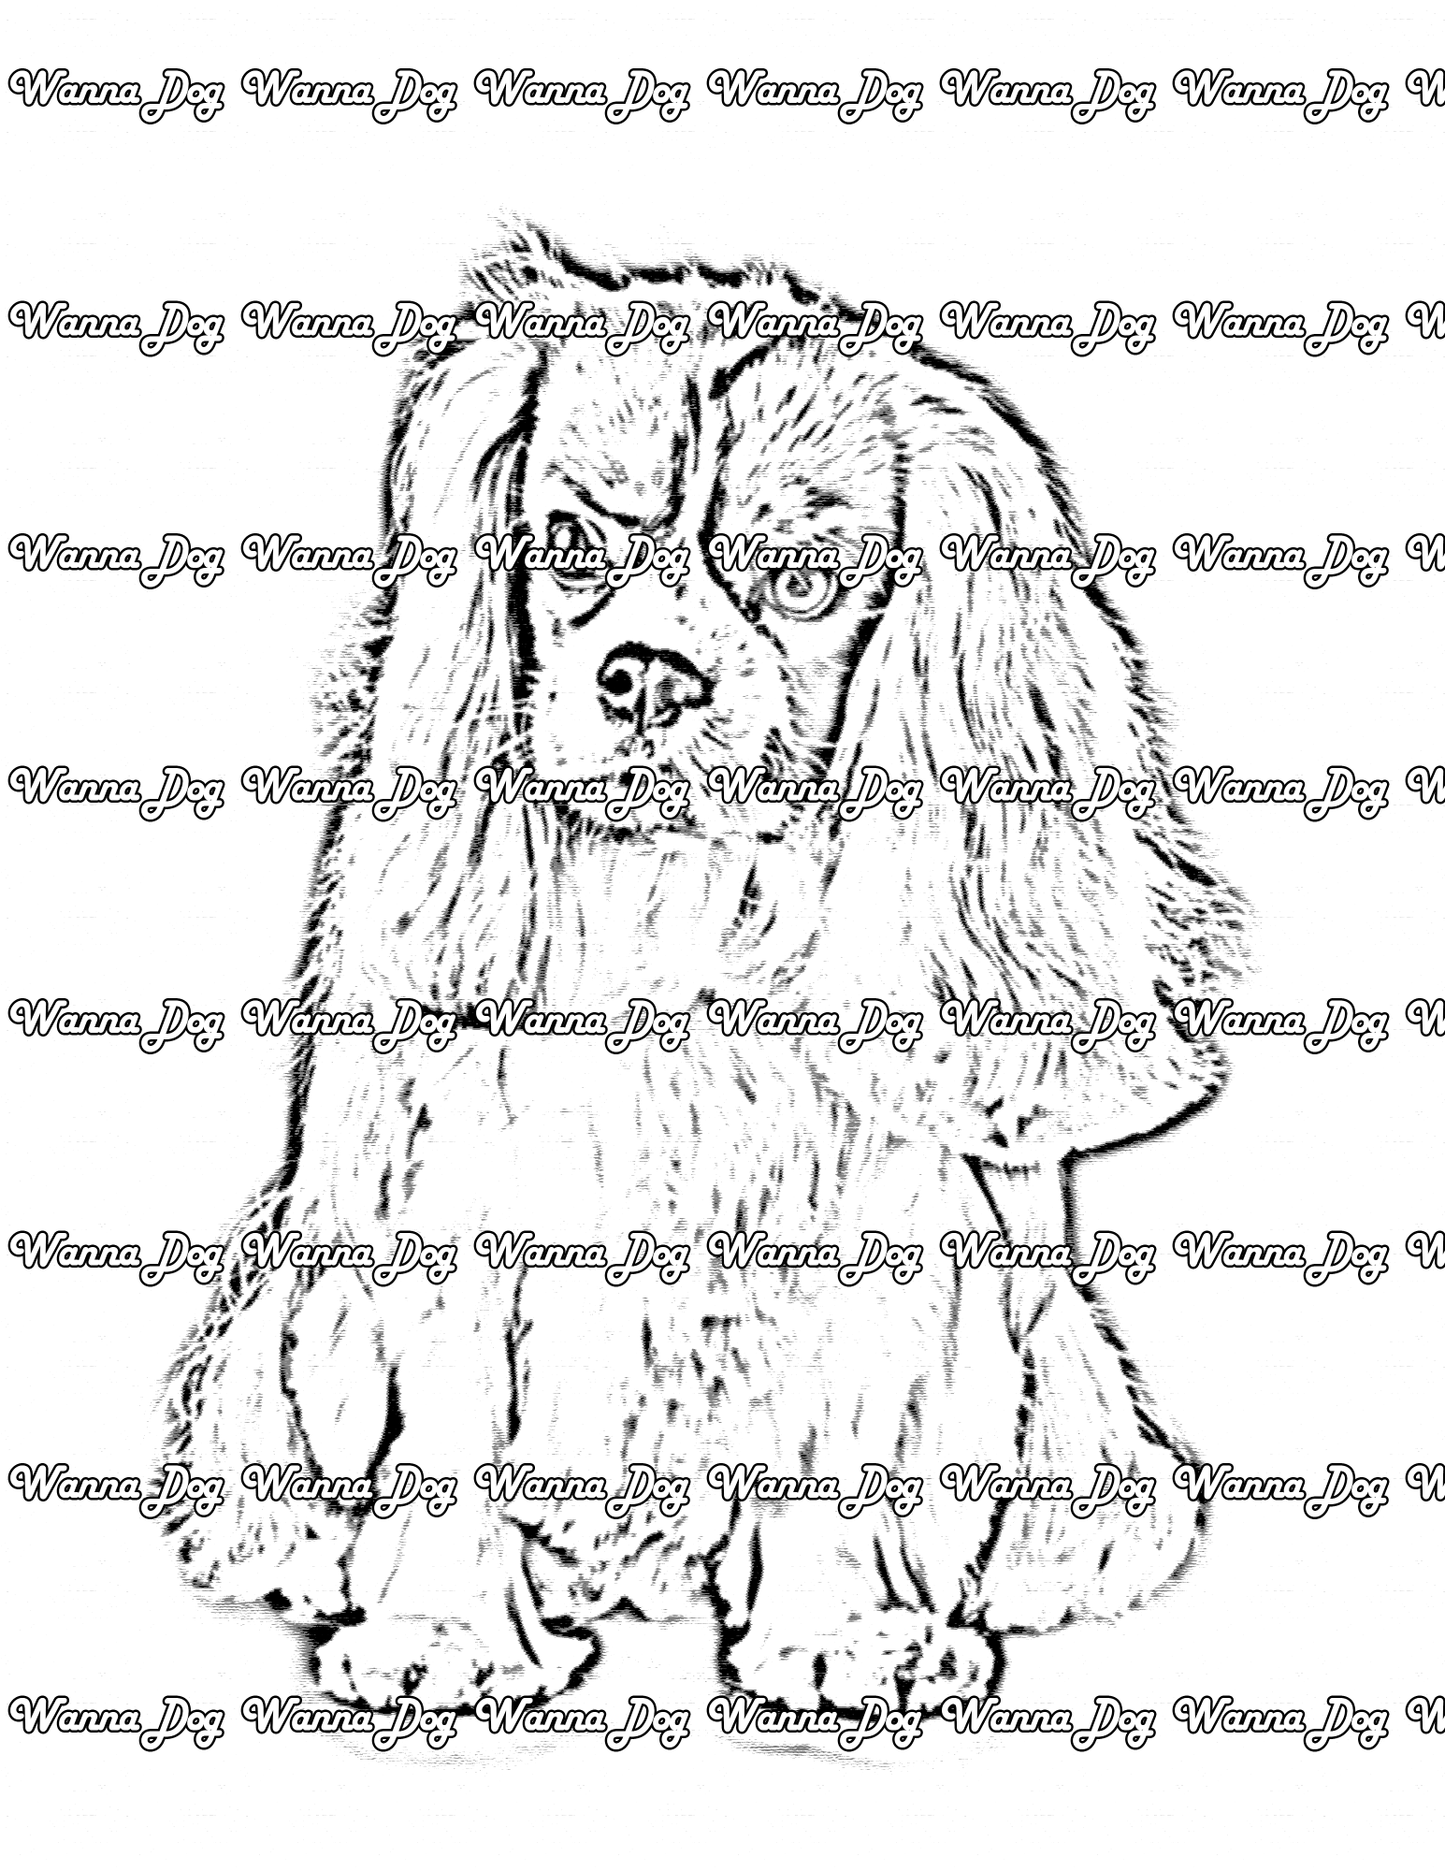 Cavalier King Charles Spaniel Coloring Page of a Cavalier King Charles Spaniel posing